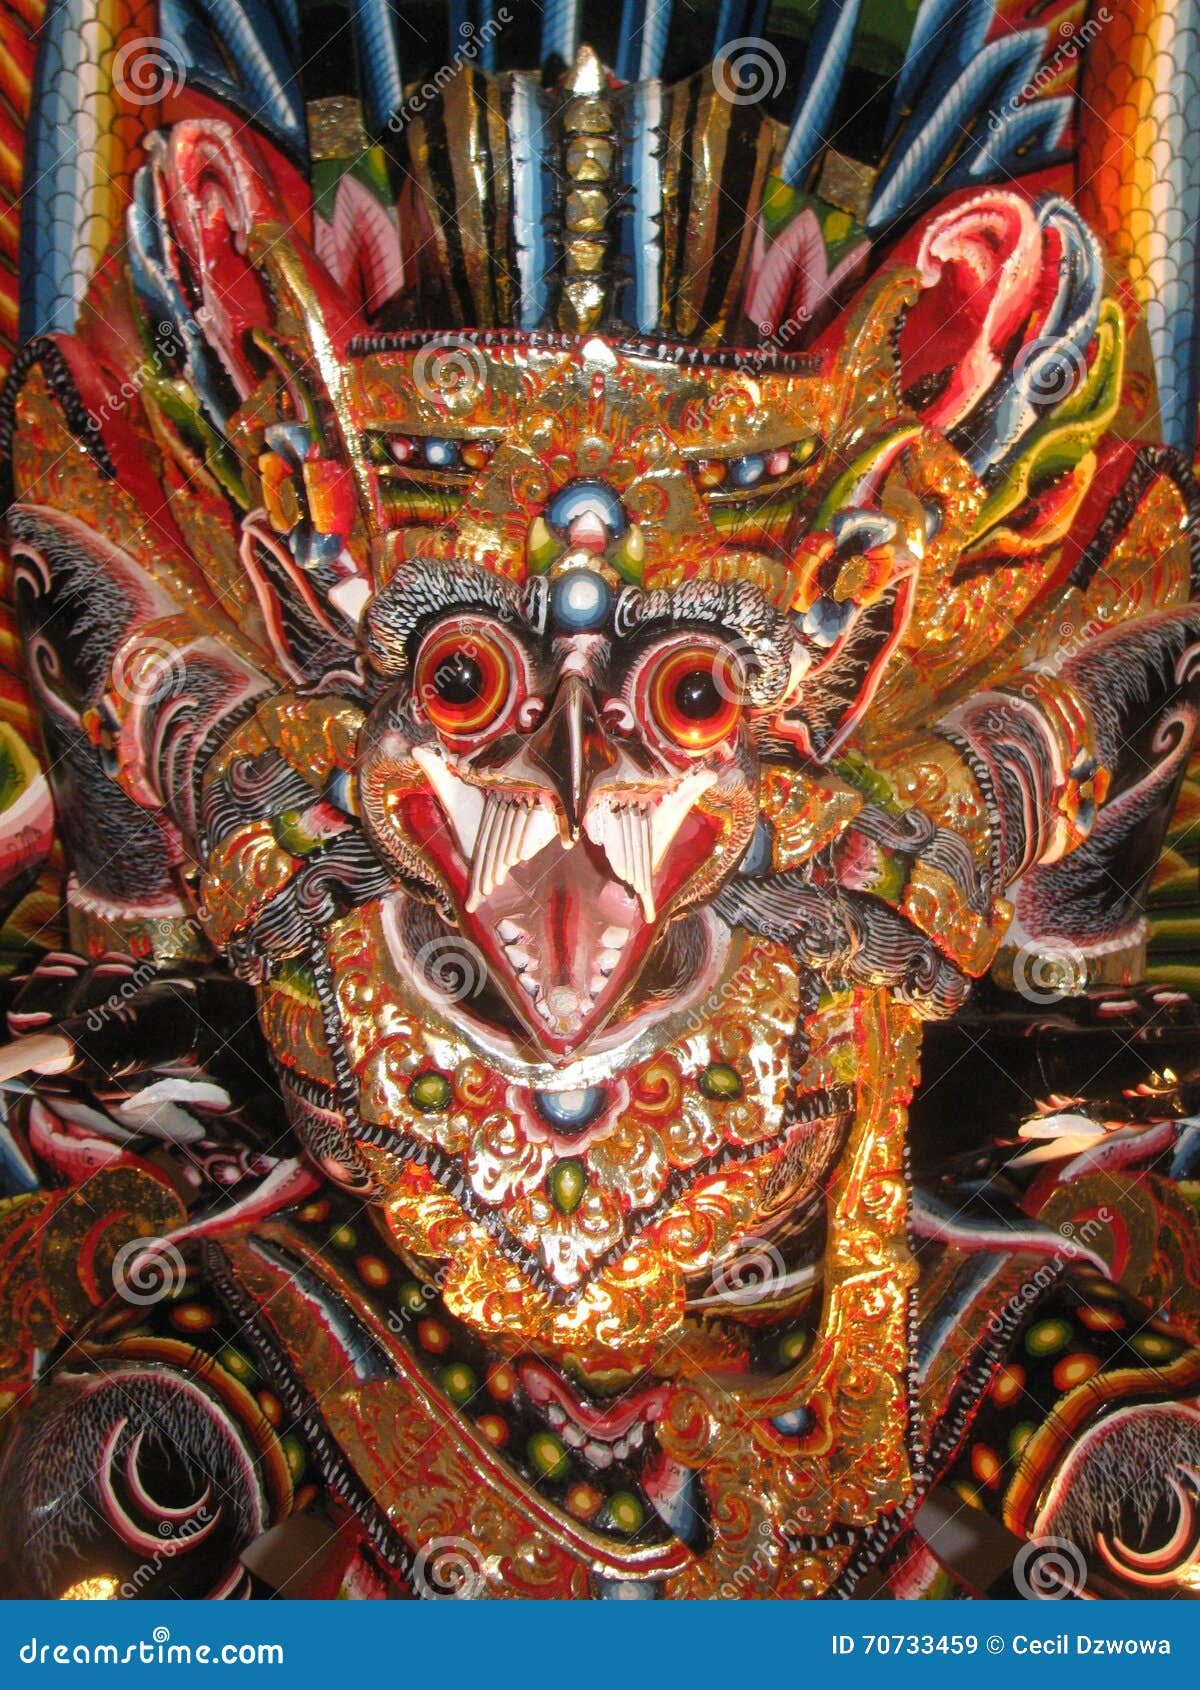 Balinese Barong on Display. Editorial Stock Image - Image of creature